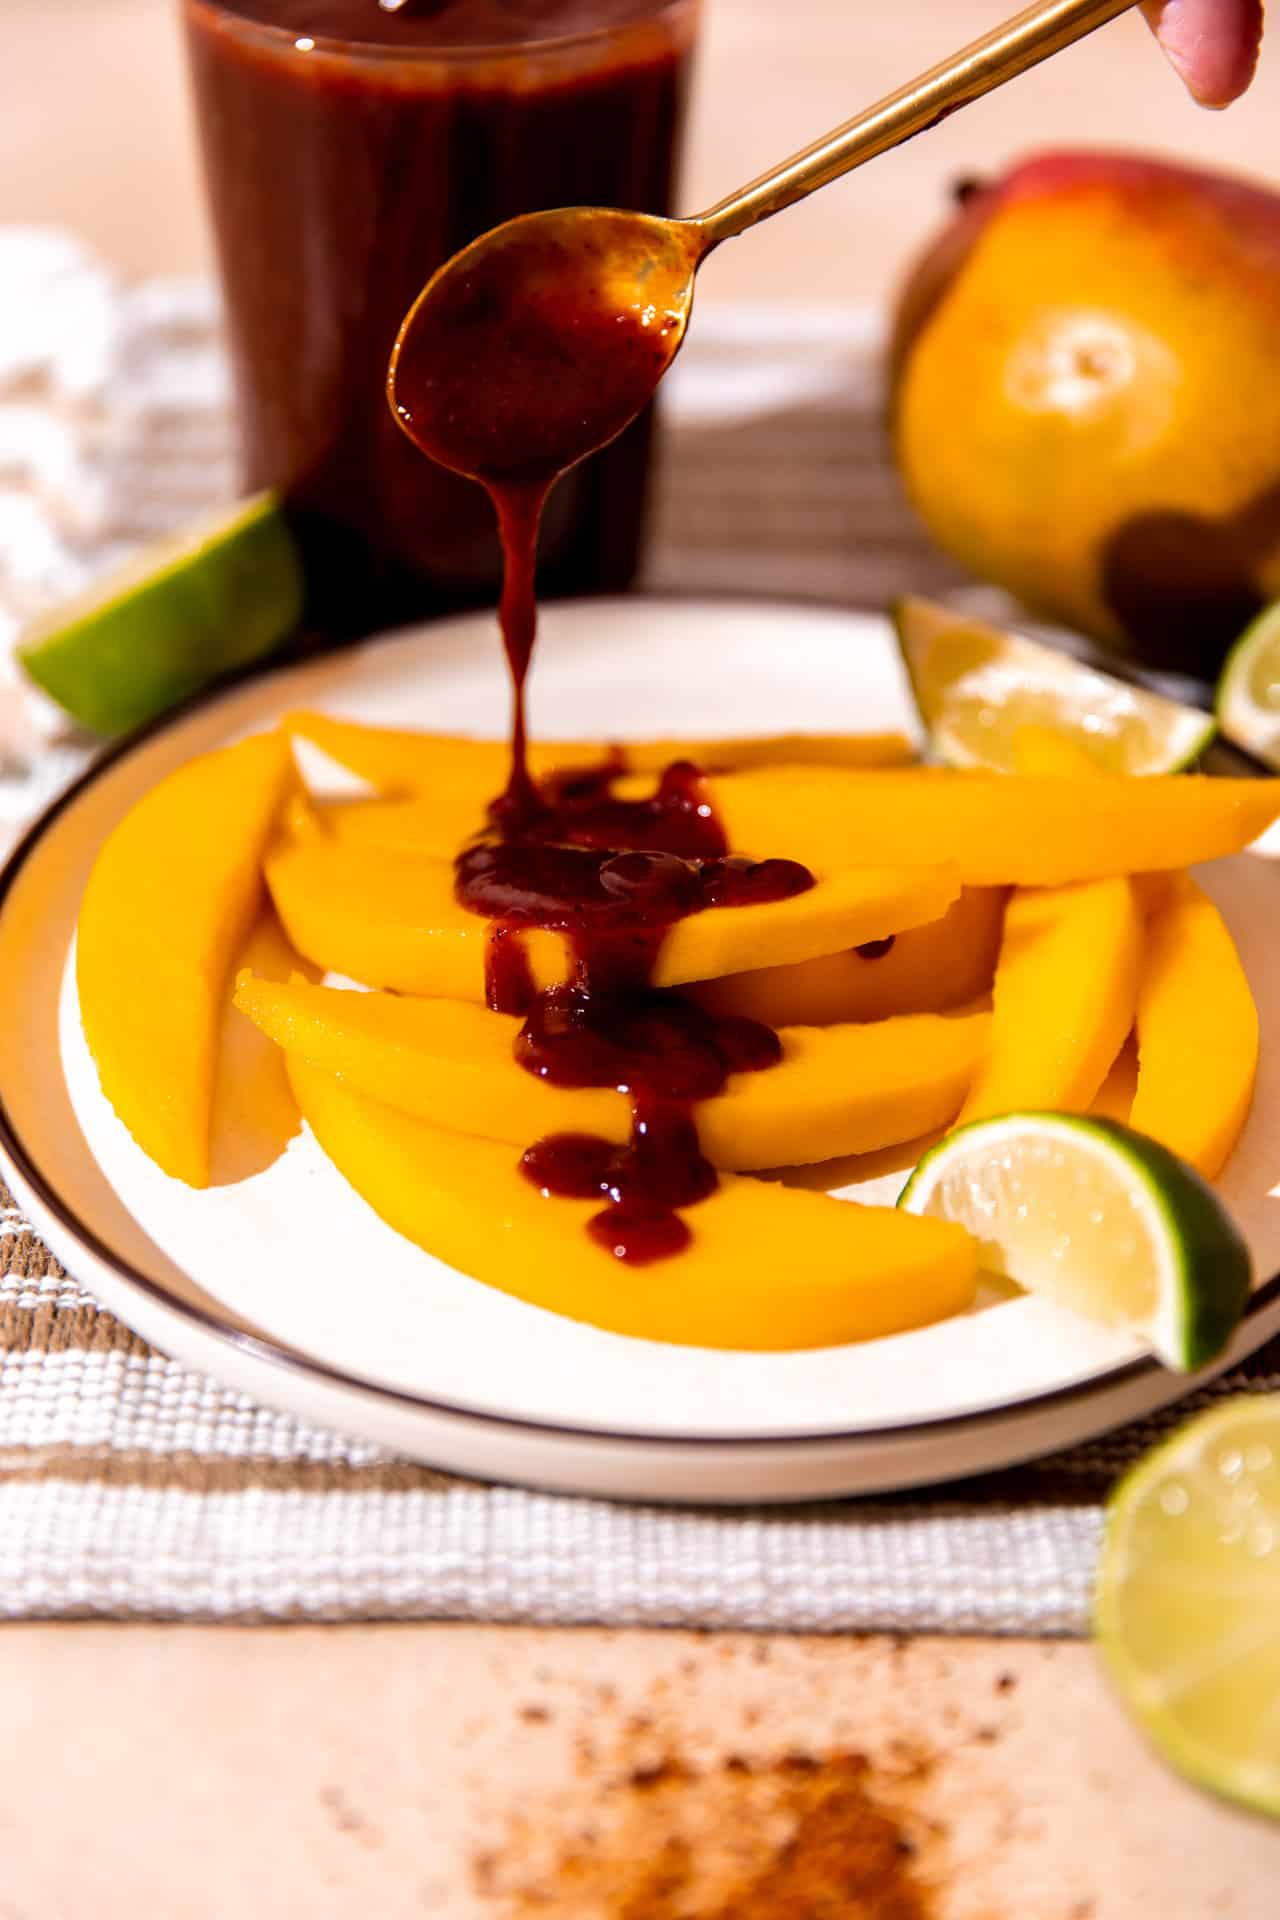 Homemade Chamoy sauce being drizzled over the top of fresh sliced mango.